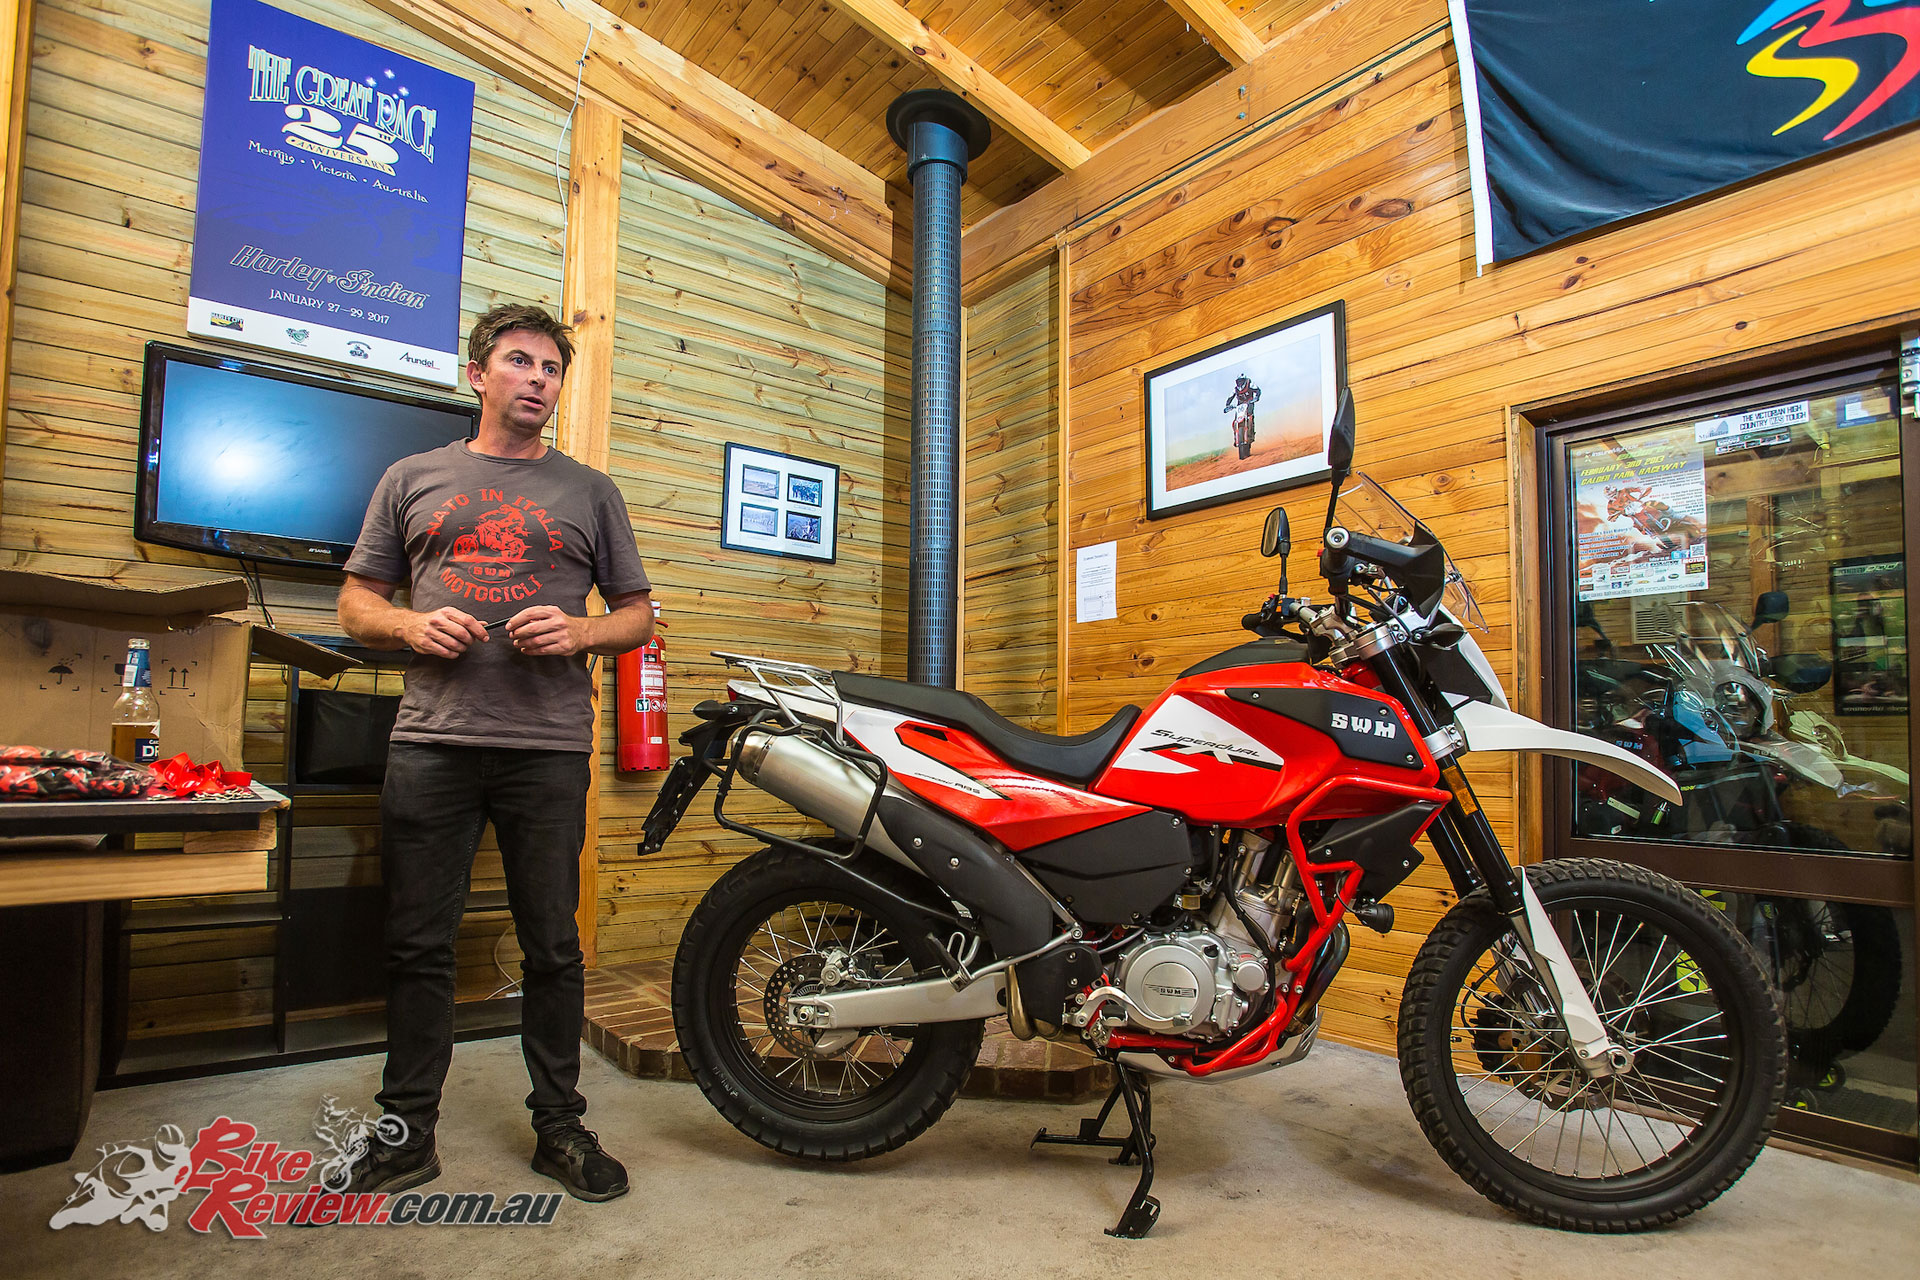 Mt. Buller Motorcycle Adventures had a full route planned out to properly test the Superdual X